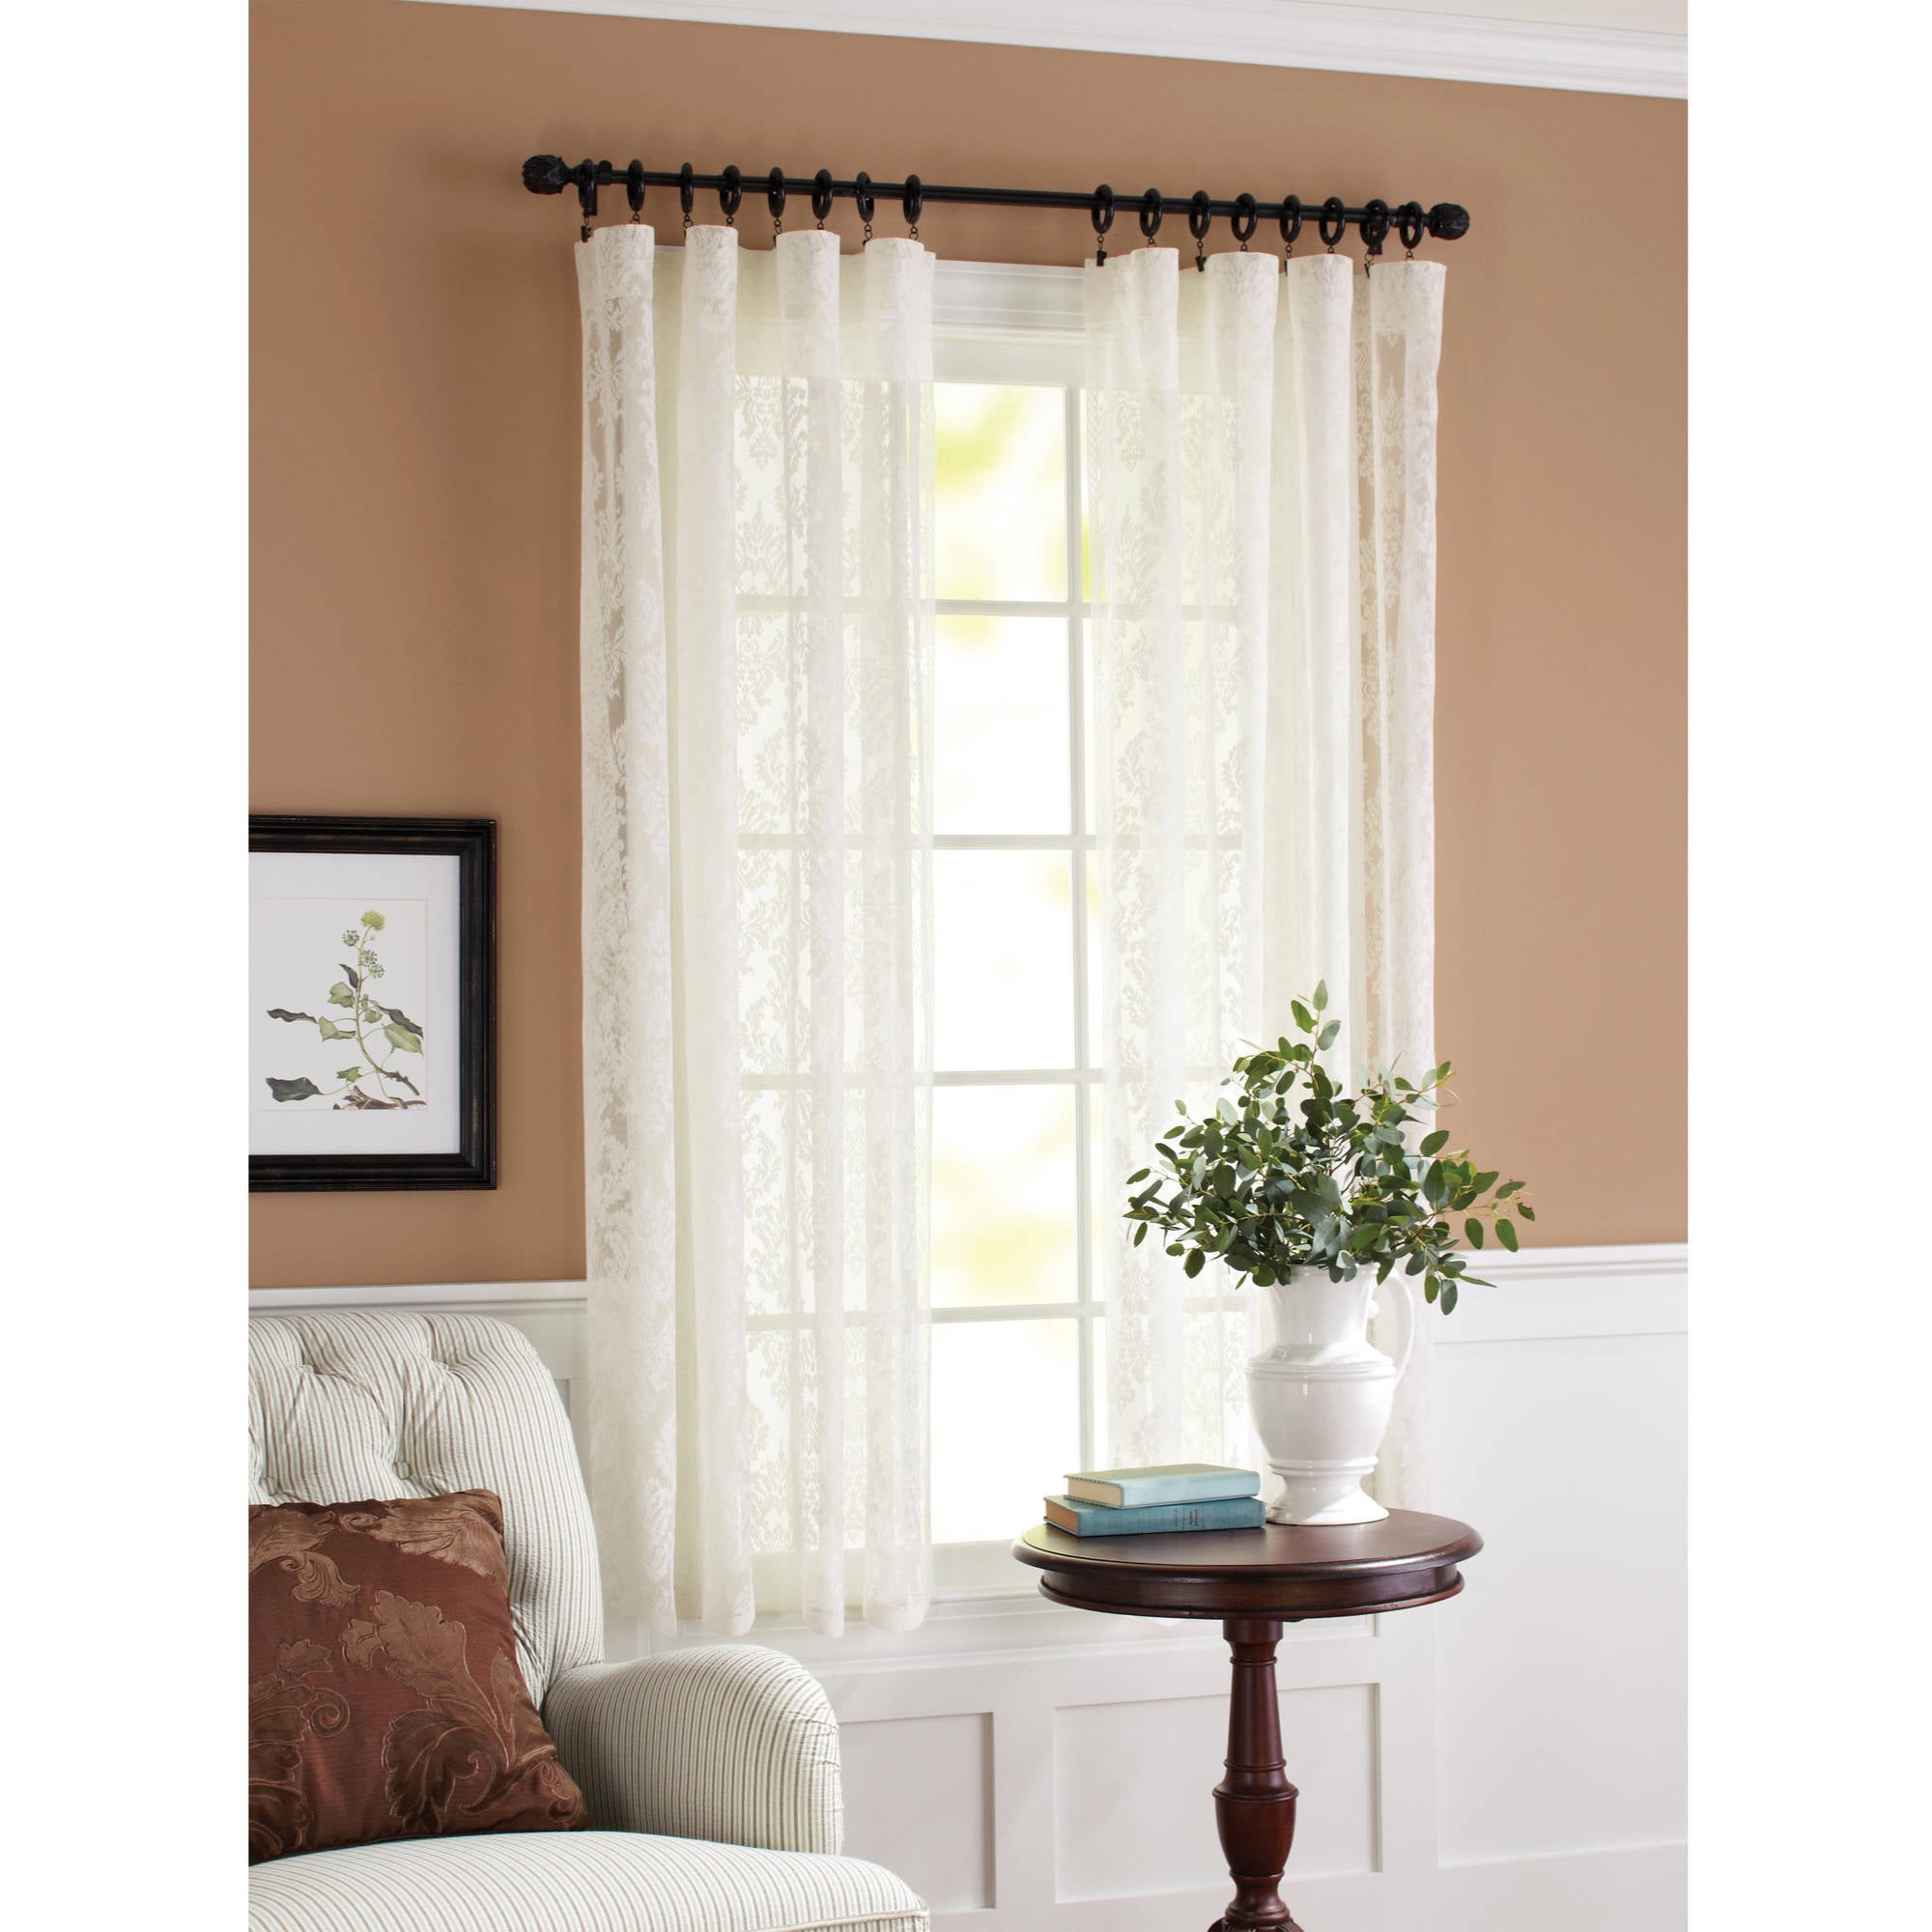 Better Homes And Gardens Curtains Walmart Home The Honoroak